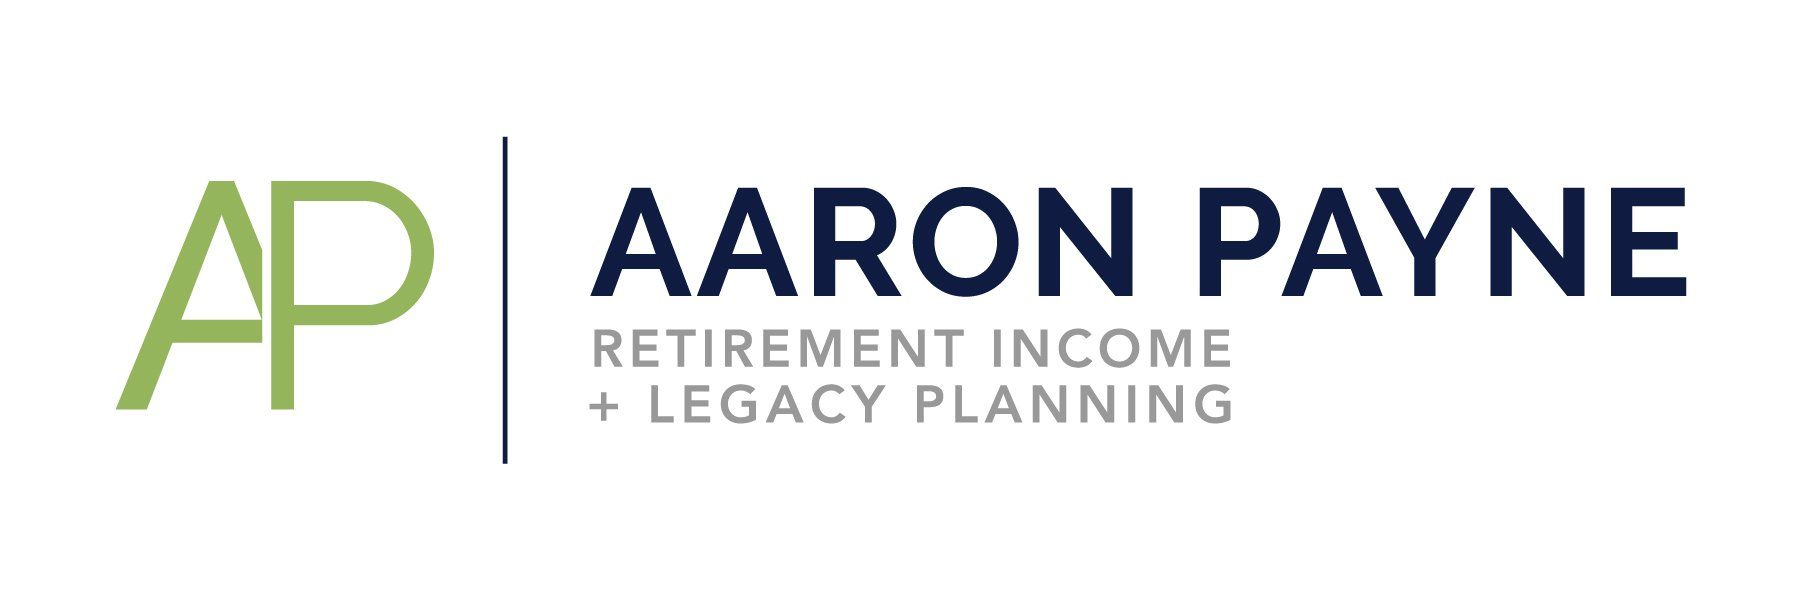 Aaron Payne Retirement Income + Legacy Planning